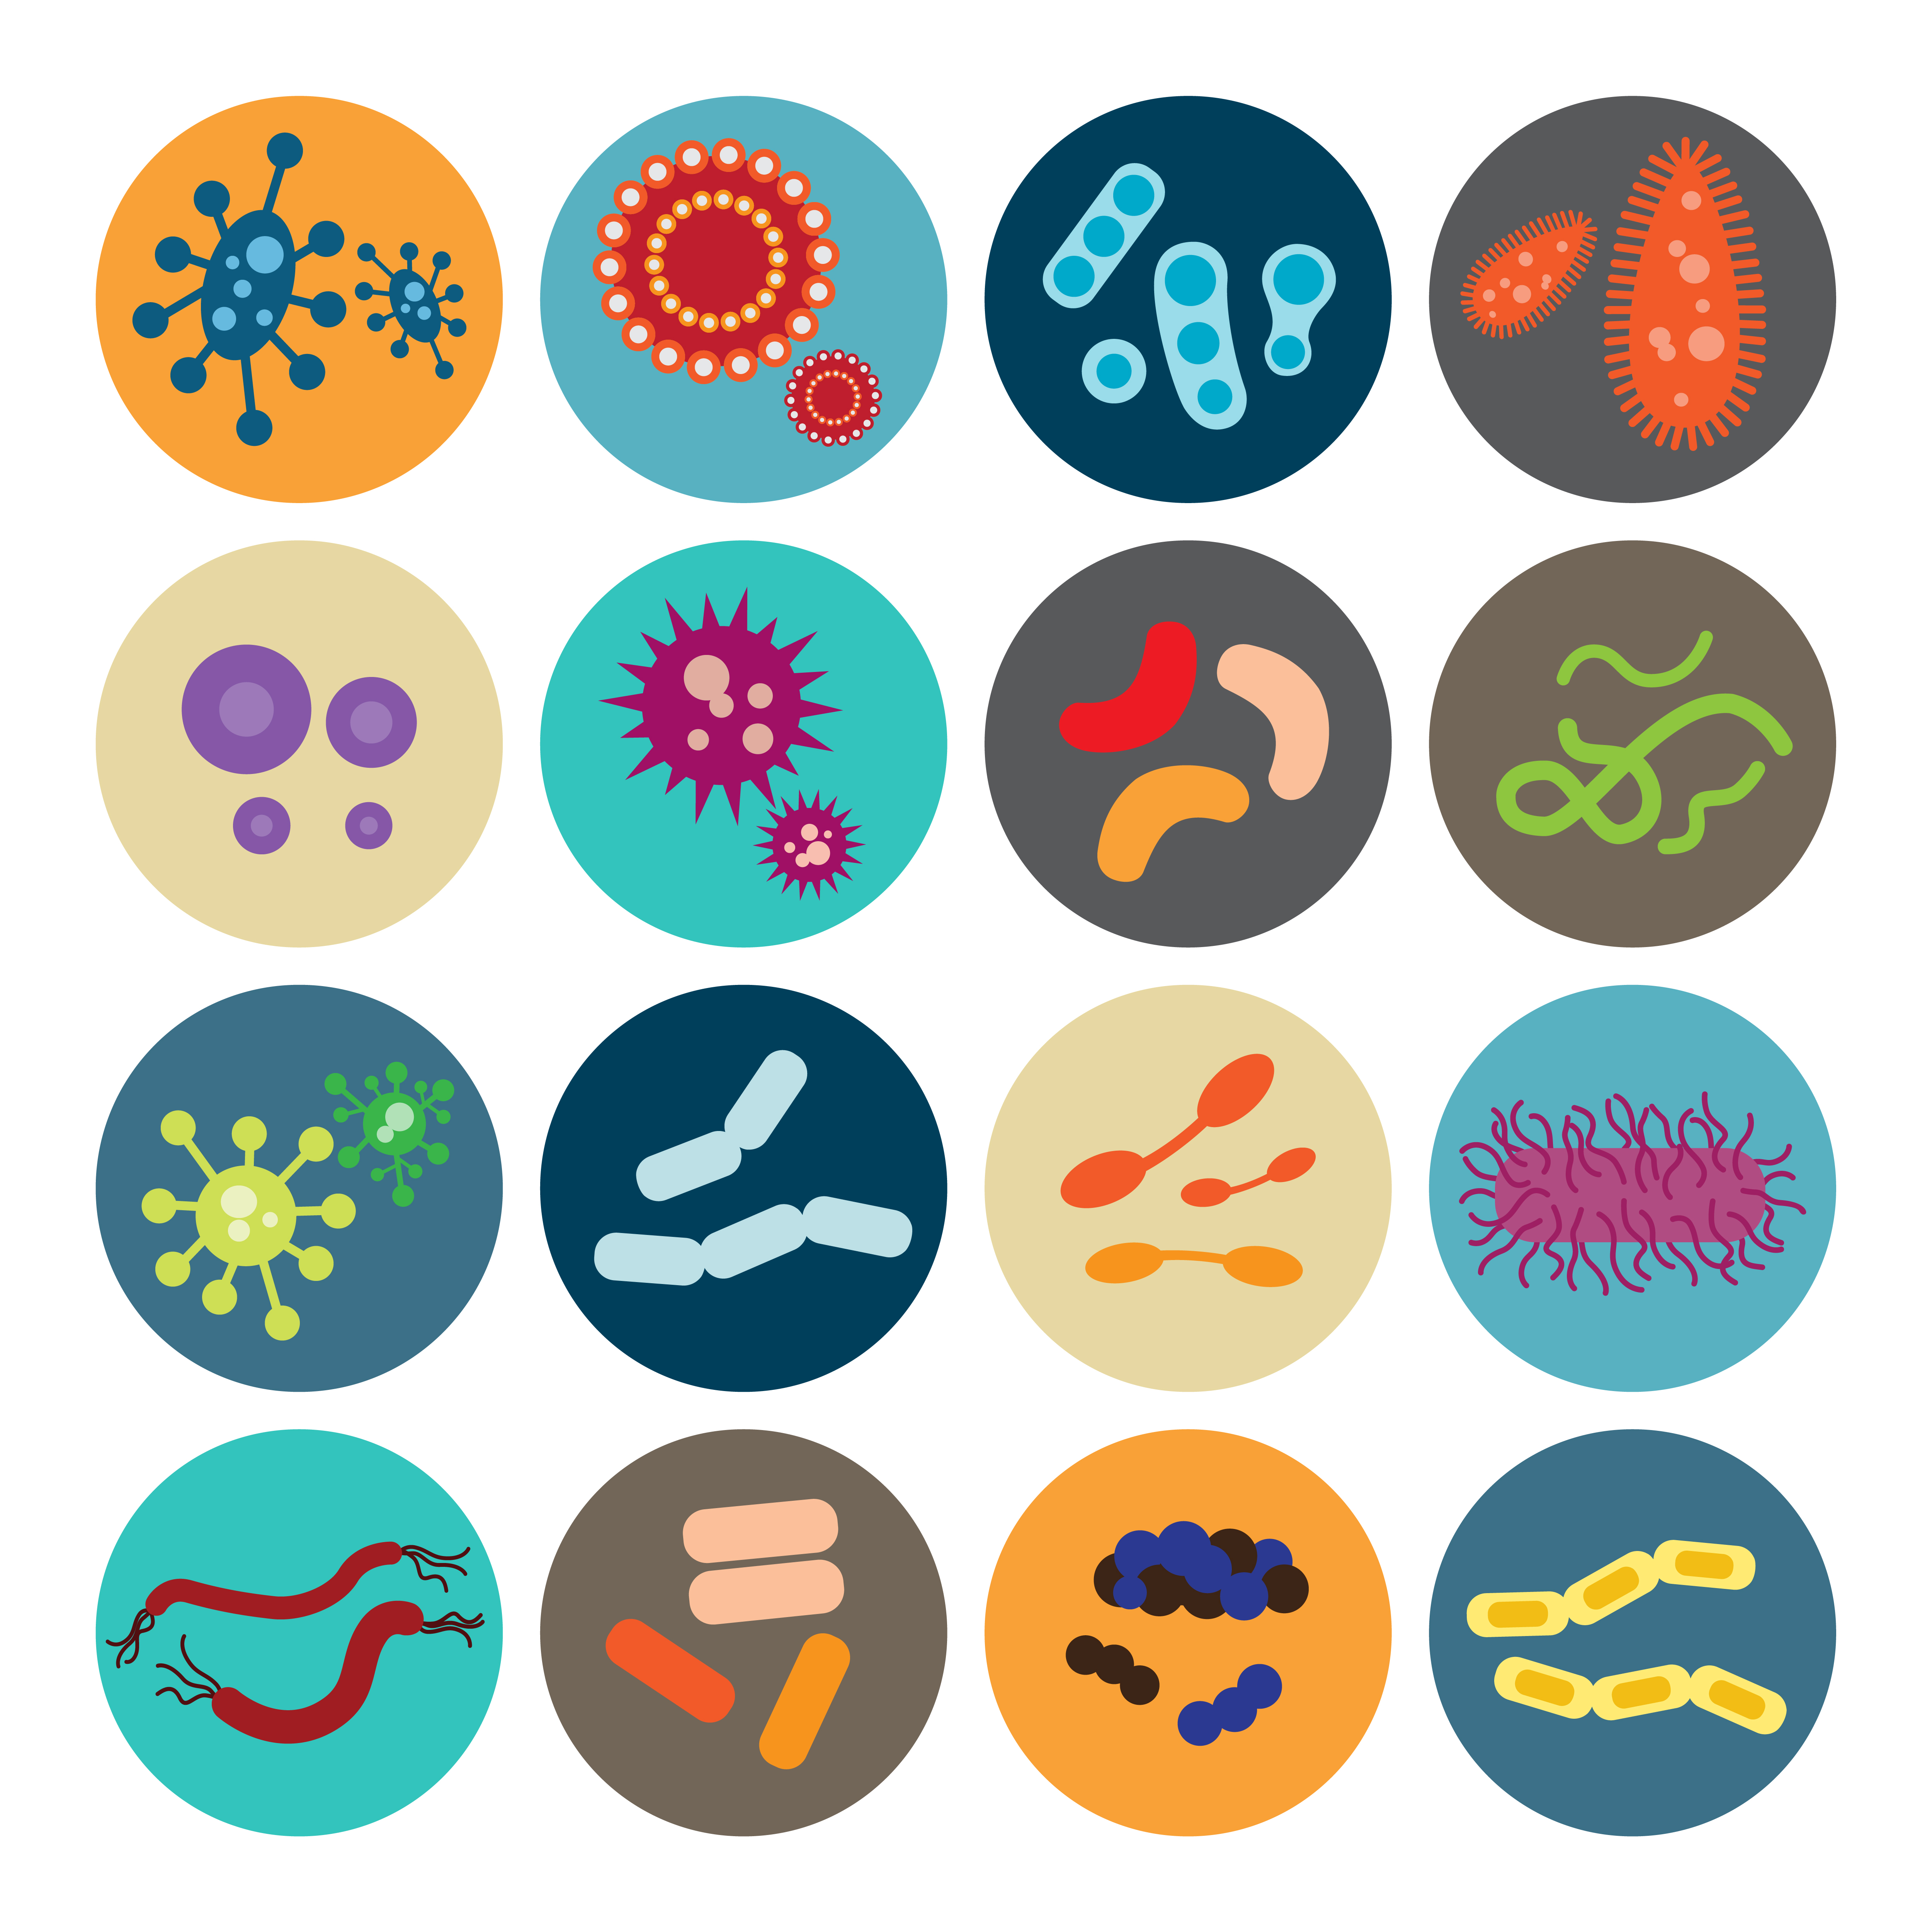 When infection overwhelms harvard. Bacteria clipart sepsis